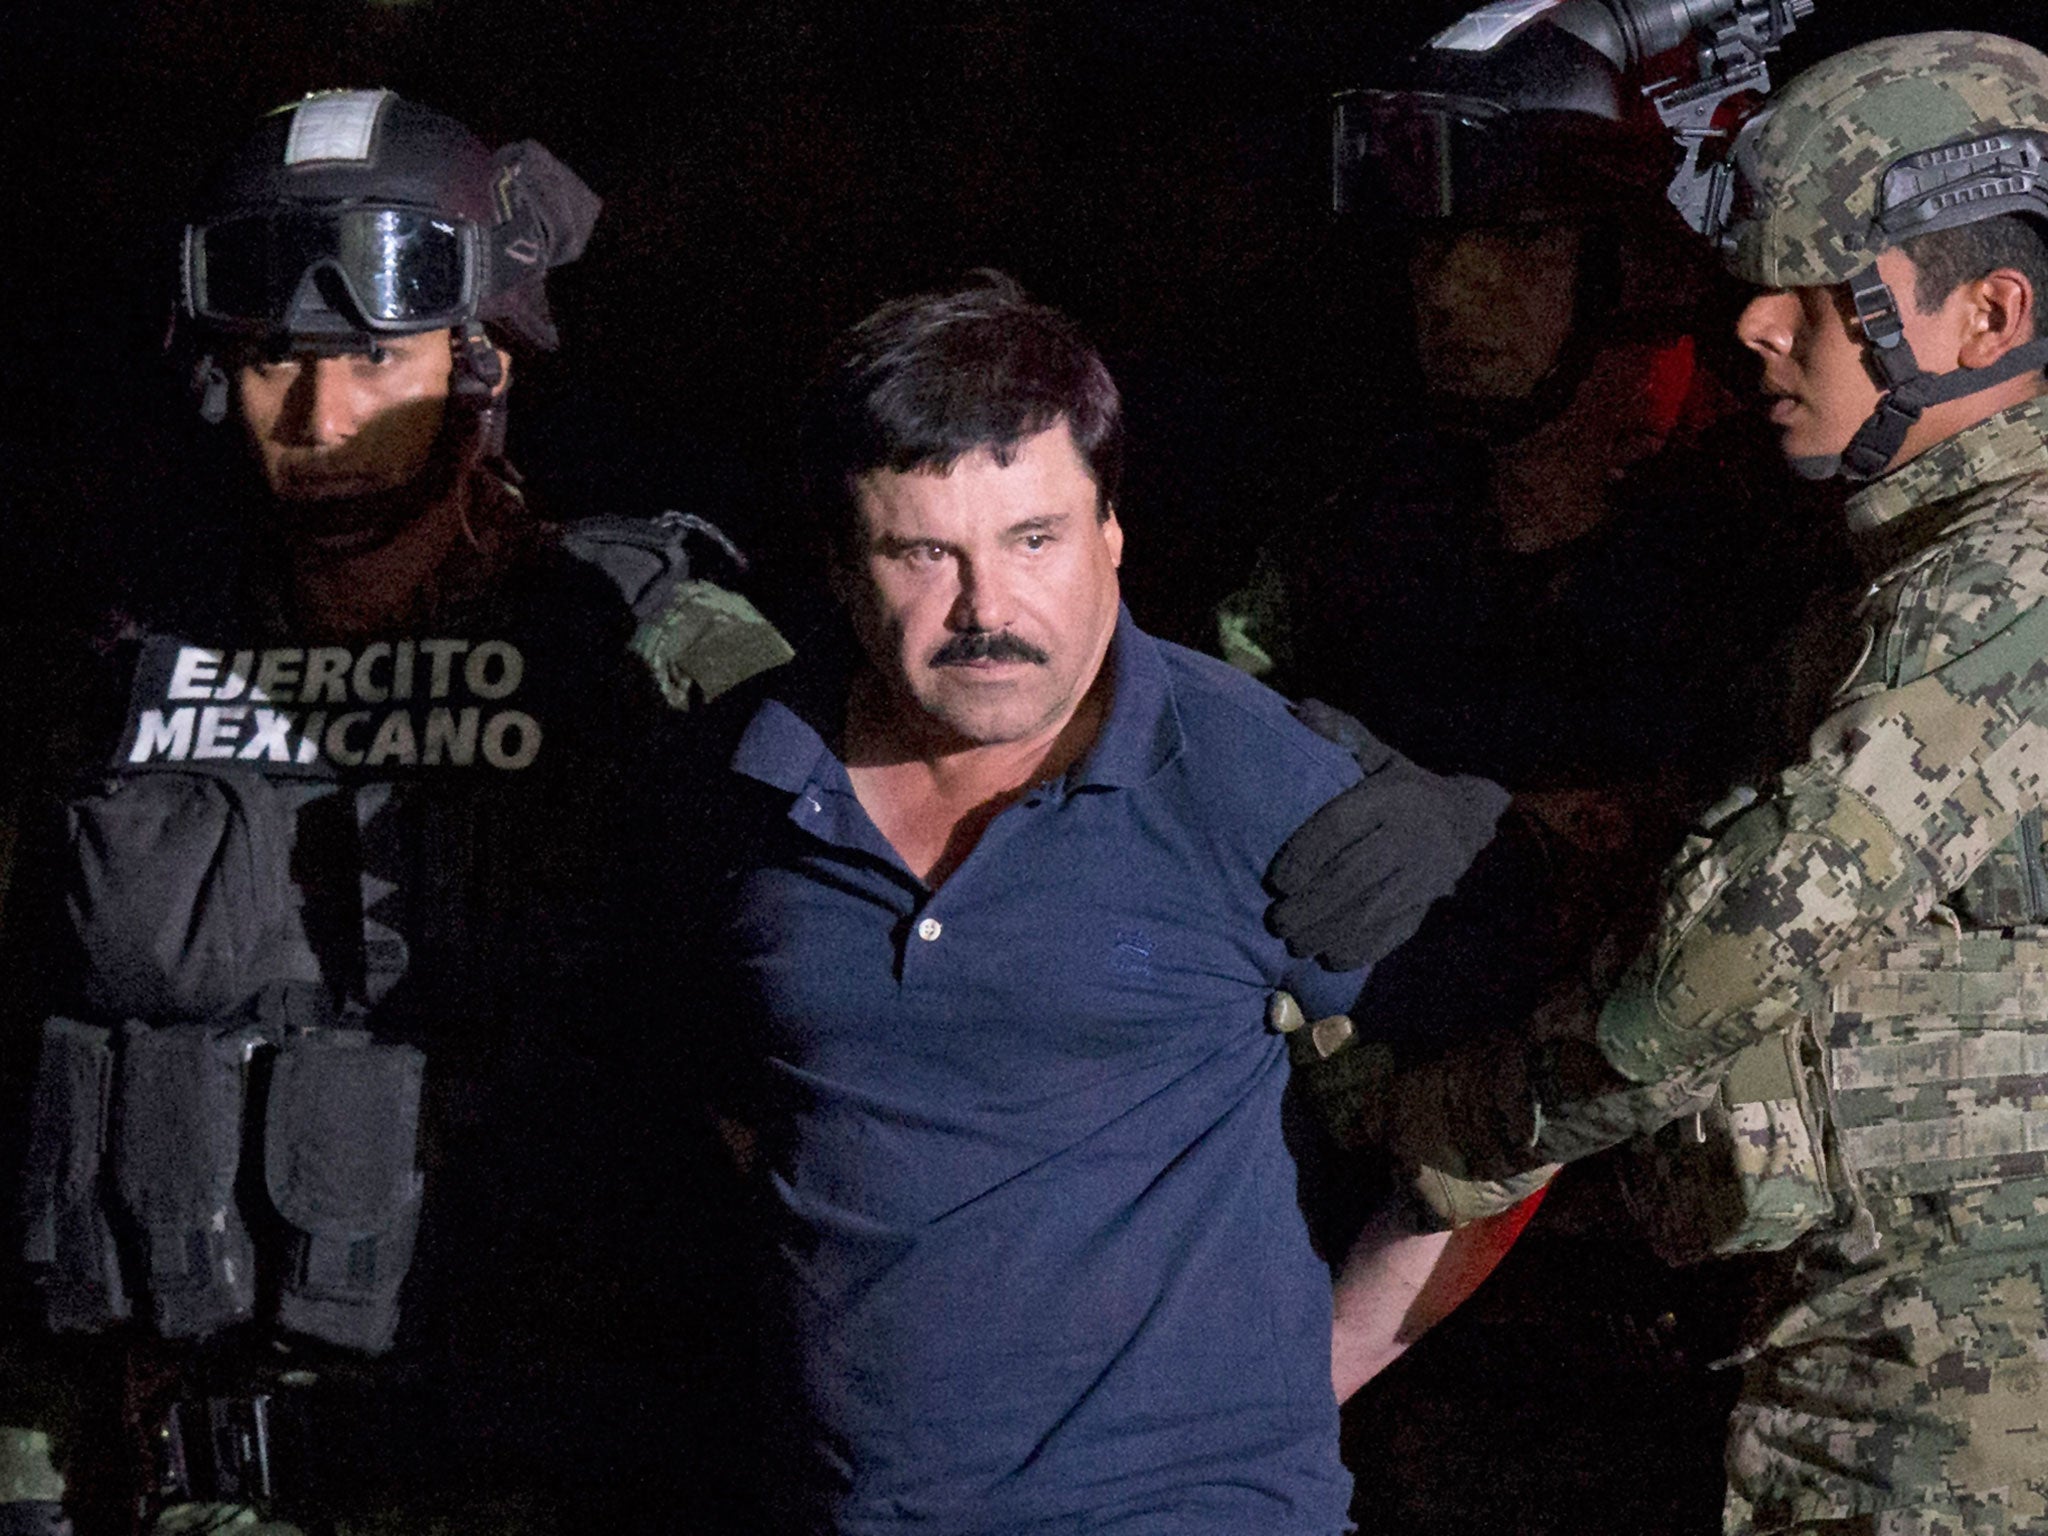 Drugs cartel leader Joaquin “El Chapo” Guzman is presented to media in Mexico after his recapture on 8 January